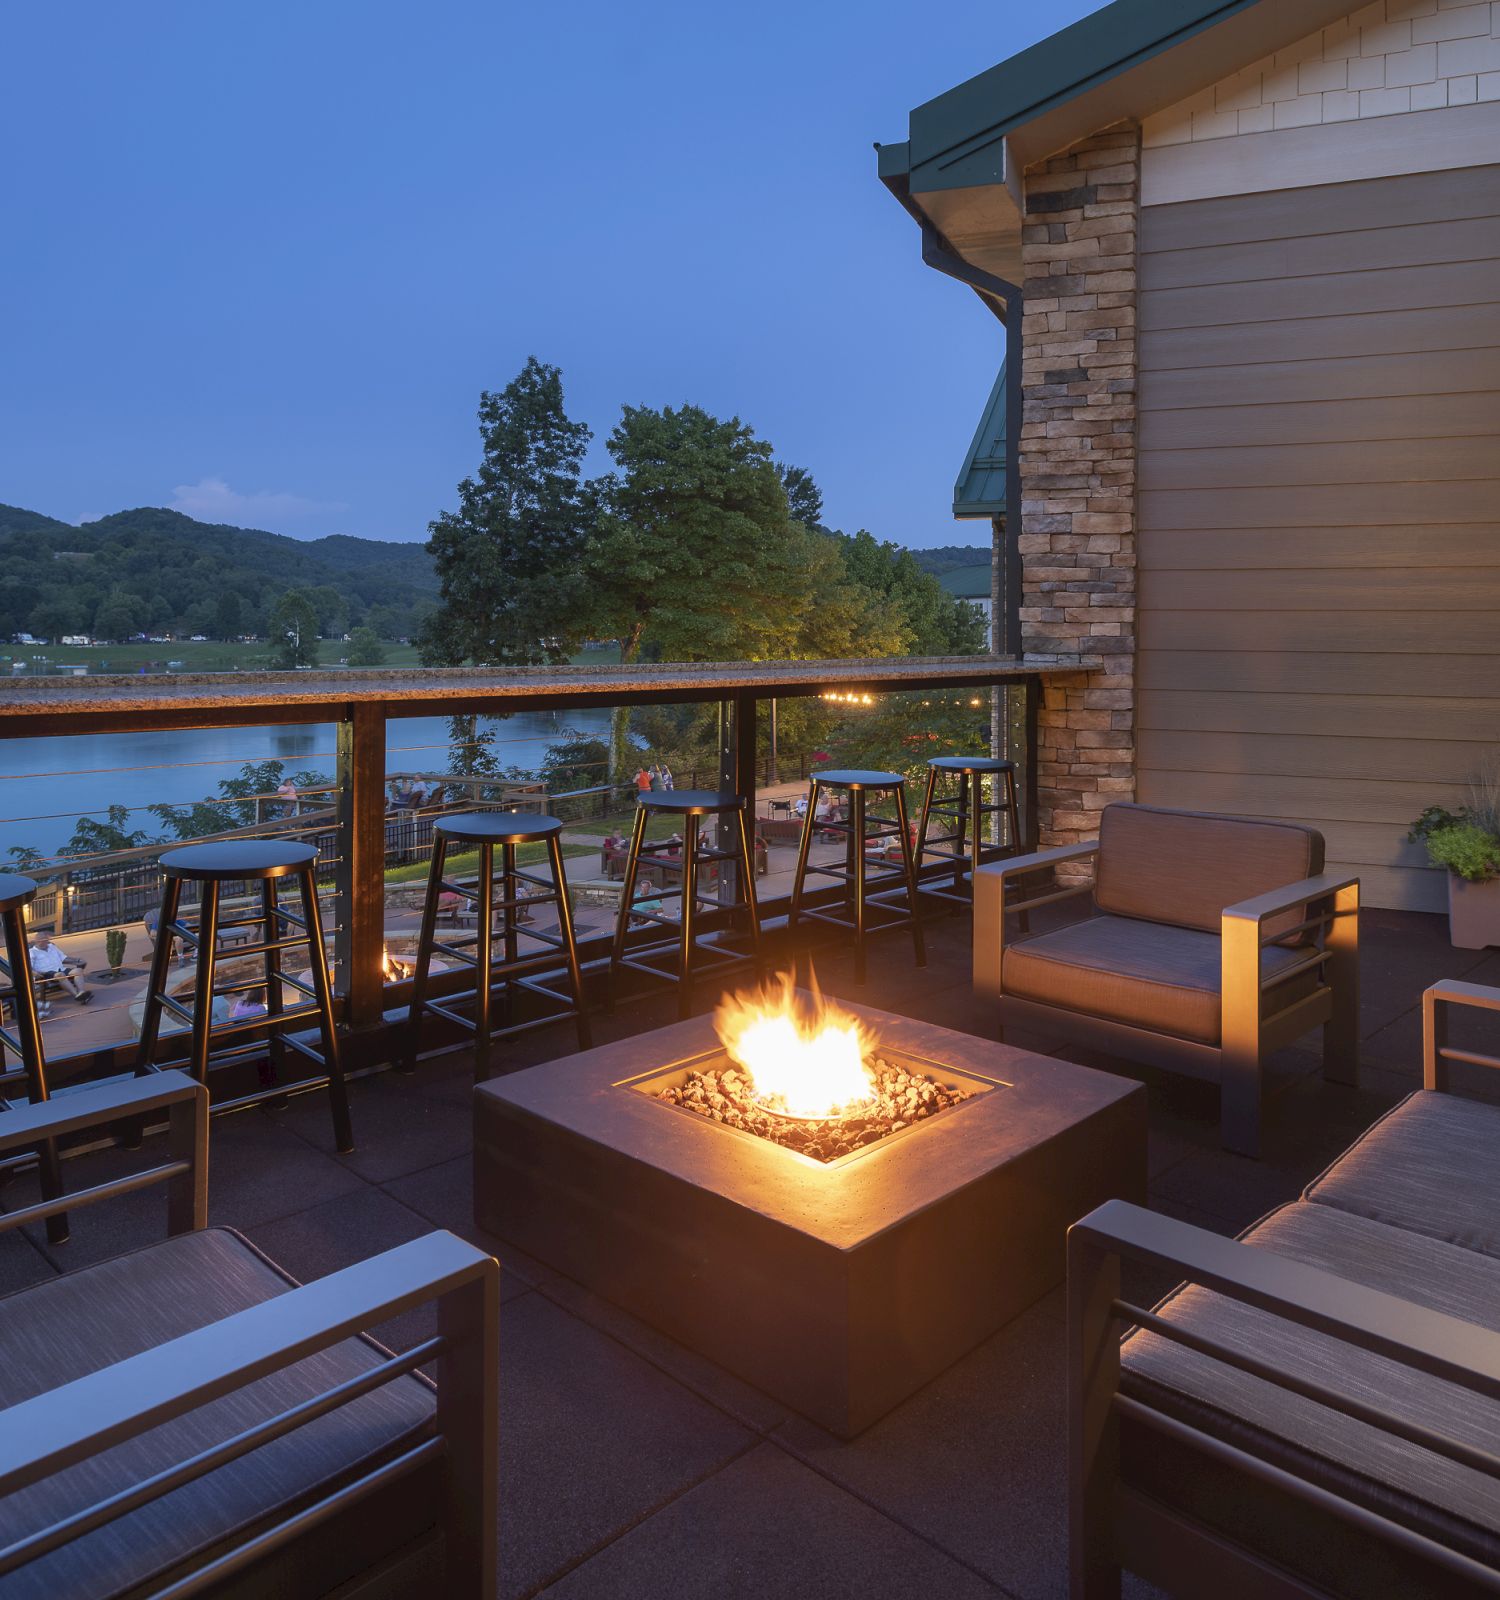 A cozy outdoor seating area with a fire pit at dusk, overlooking a serene lake and surrounded by nature and mountains.